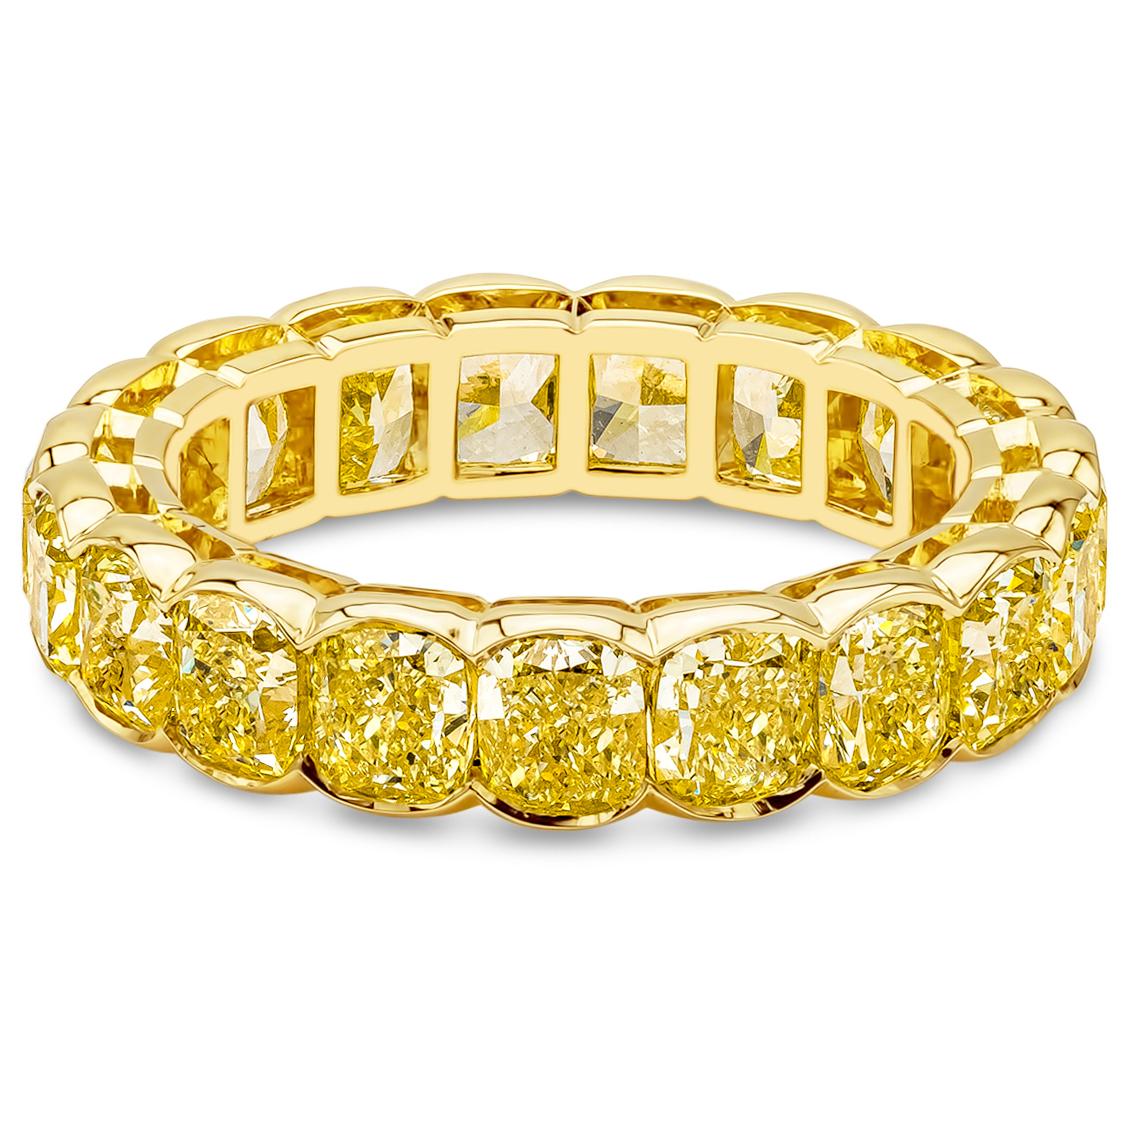 A color-rich eternity wedding band ring design showcasing a row of cushion cut fancy intense yellow diamonds weighing 6.40 carats total, VS in Clarity. Set in a chic half-bezel basket setting, Made with 18K Yellow Gold, Size 6.5 US resizable upon